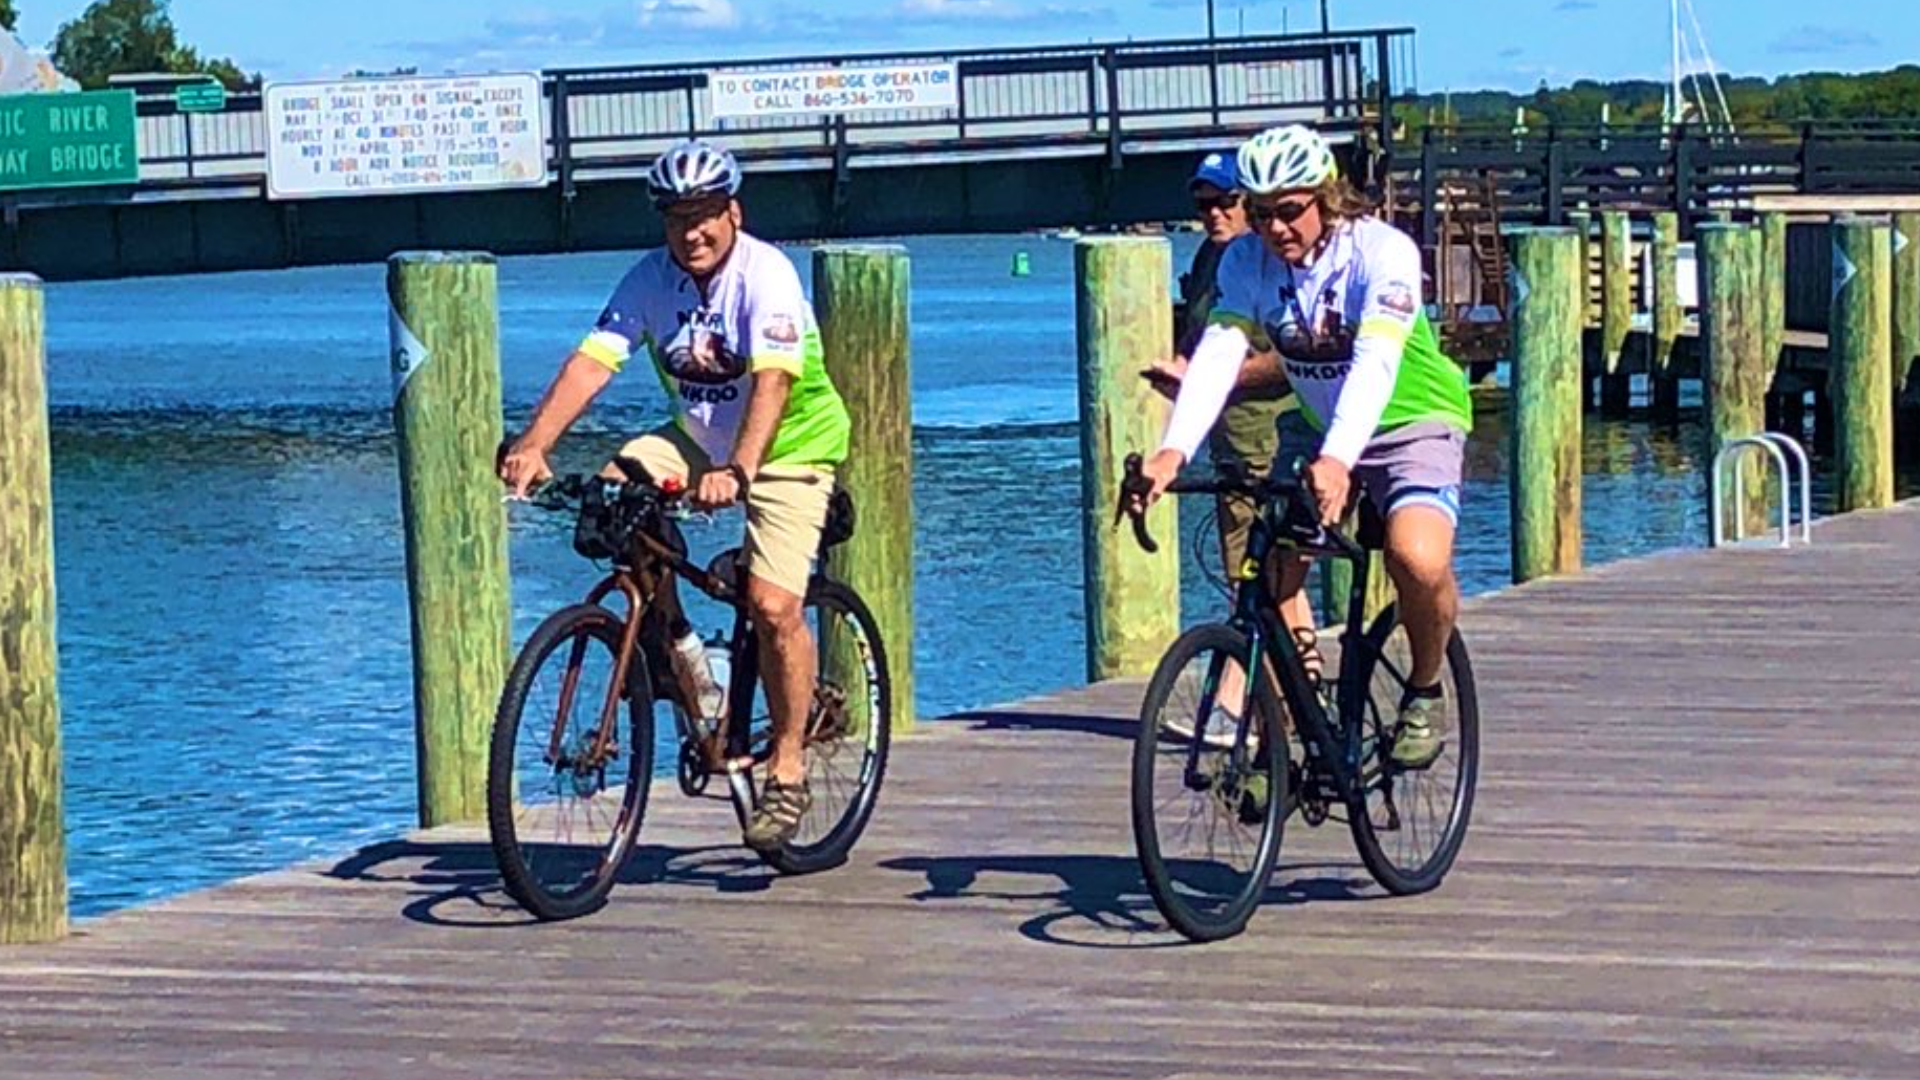 Cyclist Mark Scotch is traveling nearly 1,600-mile from Martha's Vineyard to his home in Stevens Point, Wisconsin.